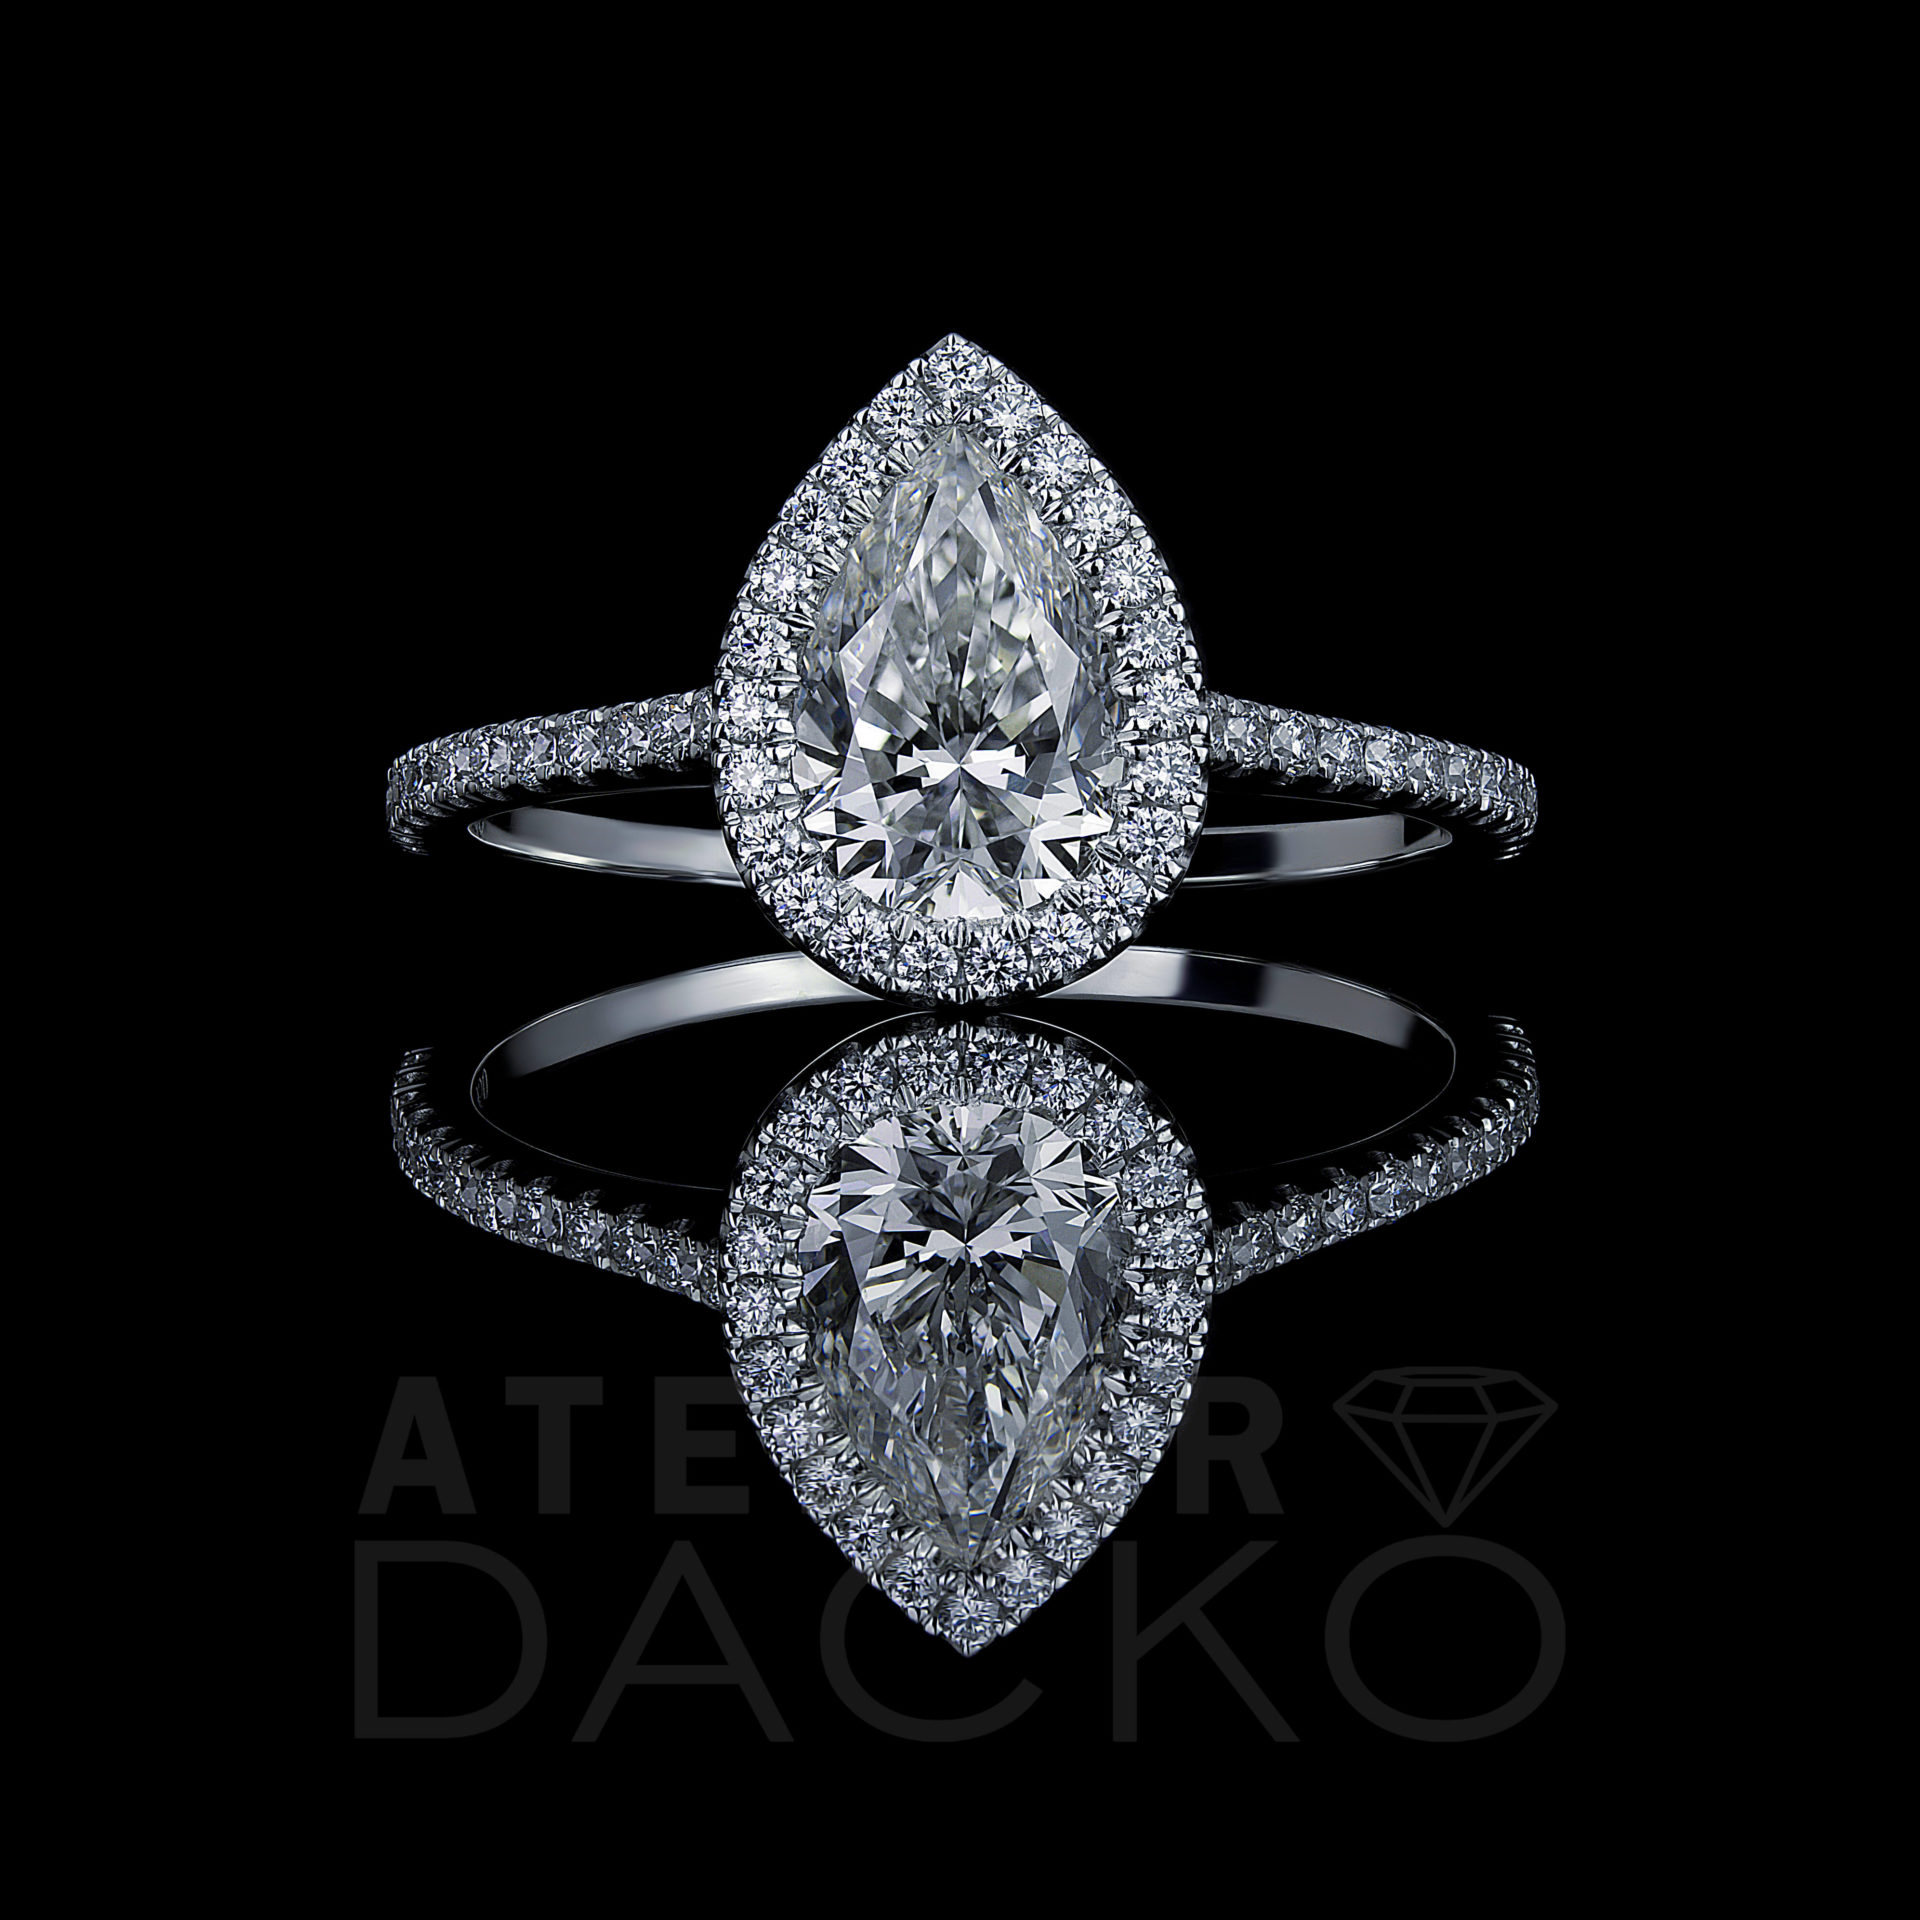 AD075-1.60 CT Pear Cut Diamond Engagement Ring in a Clawless Halo Setting-1